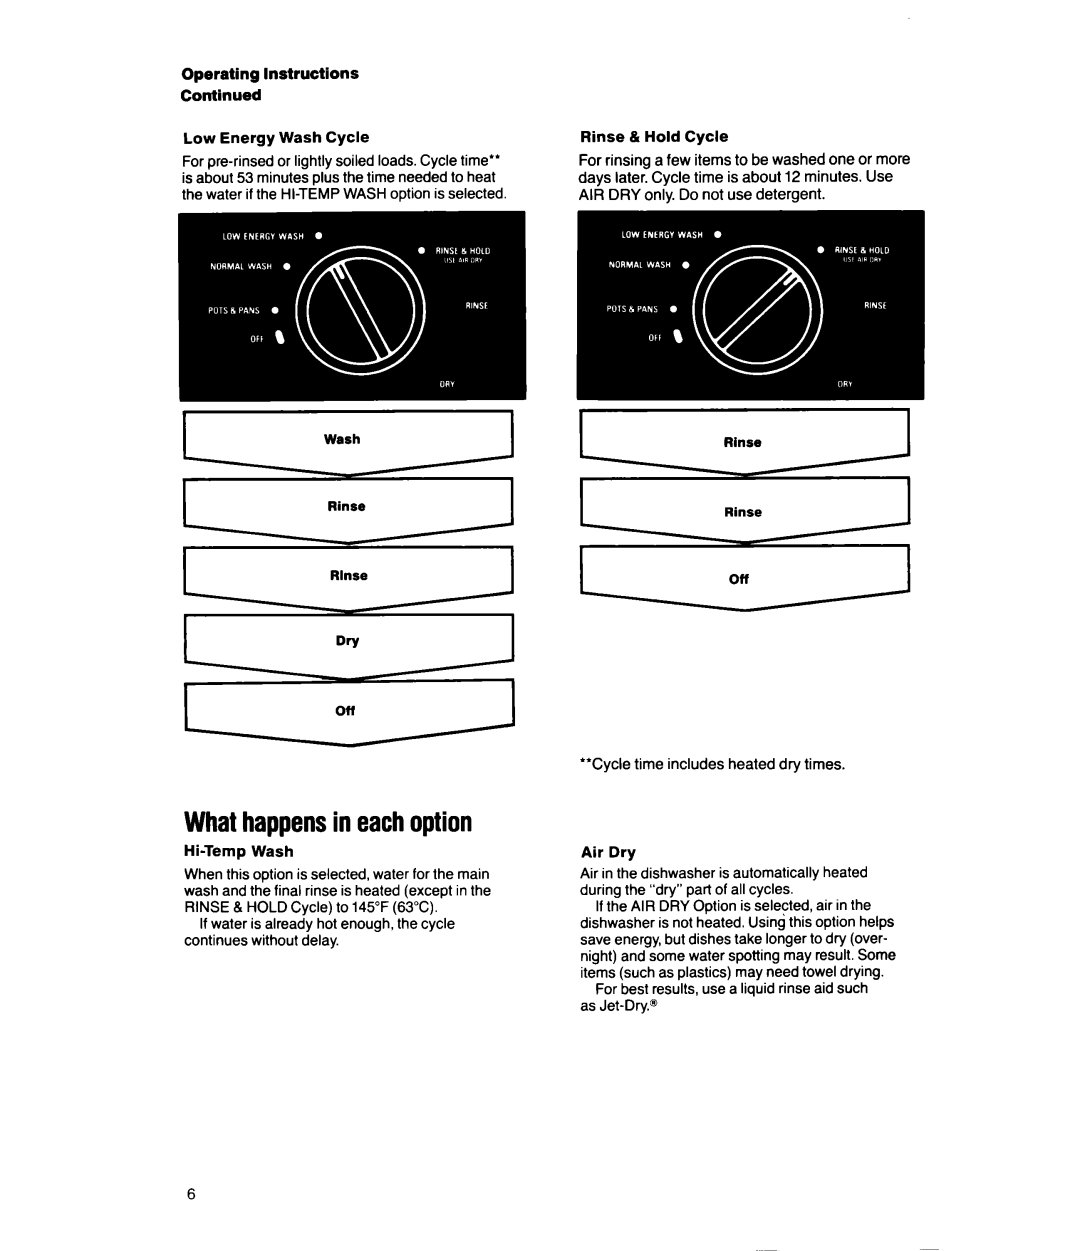 Whirlpool DU8550XT manual Whathappensin eachoption, Low Energy Wash Cycle, Hi-TempWash, Rinse 8 Hold Cycle, Air Dry 